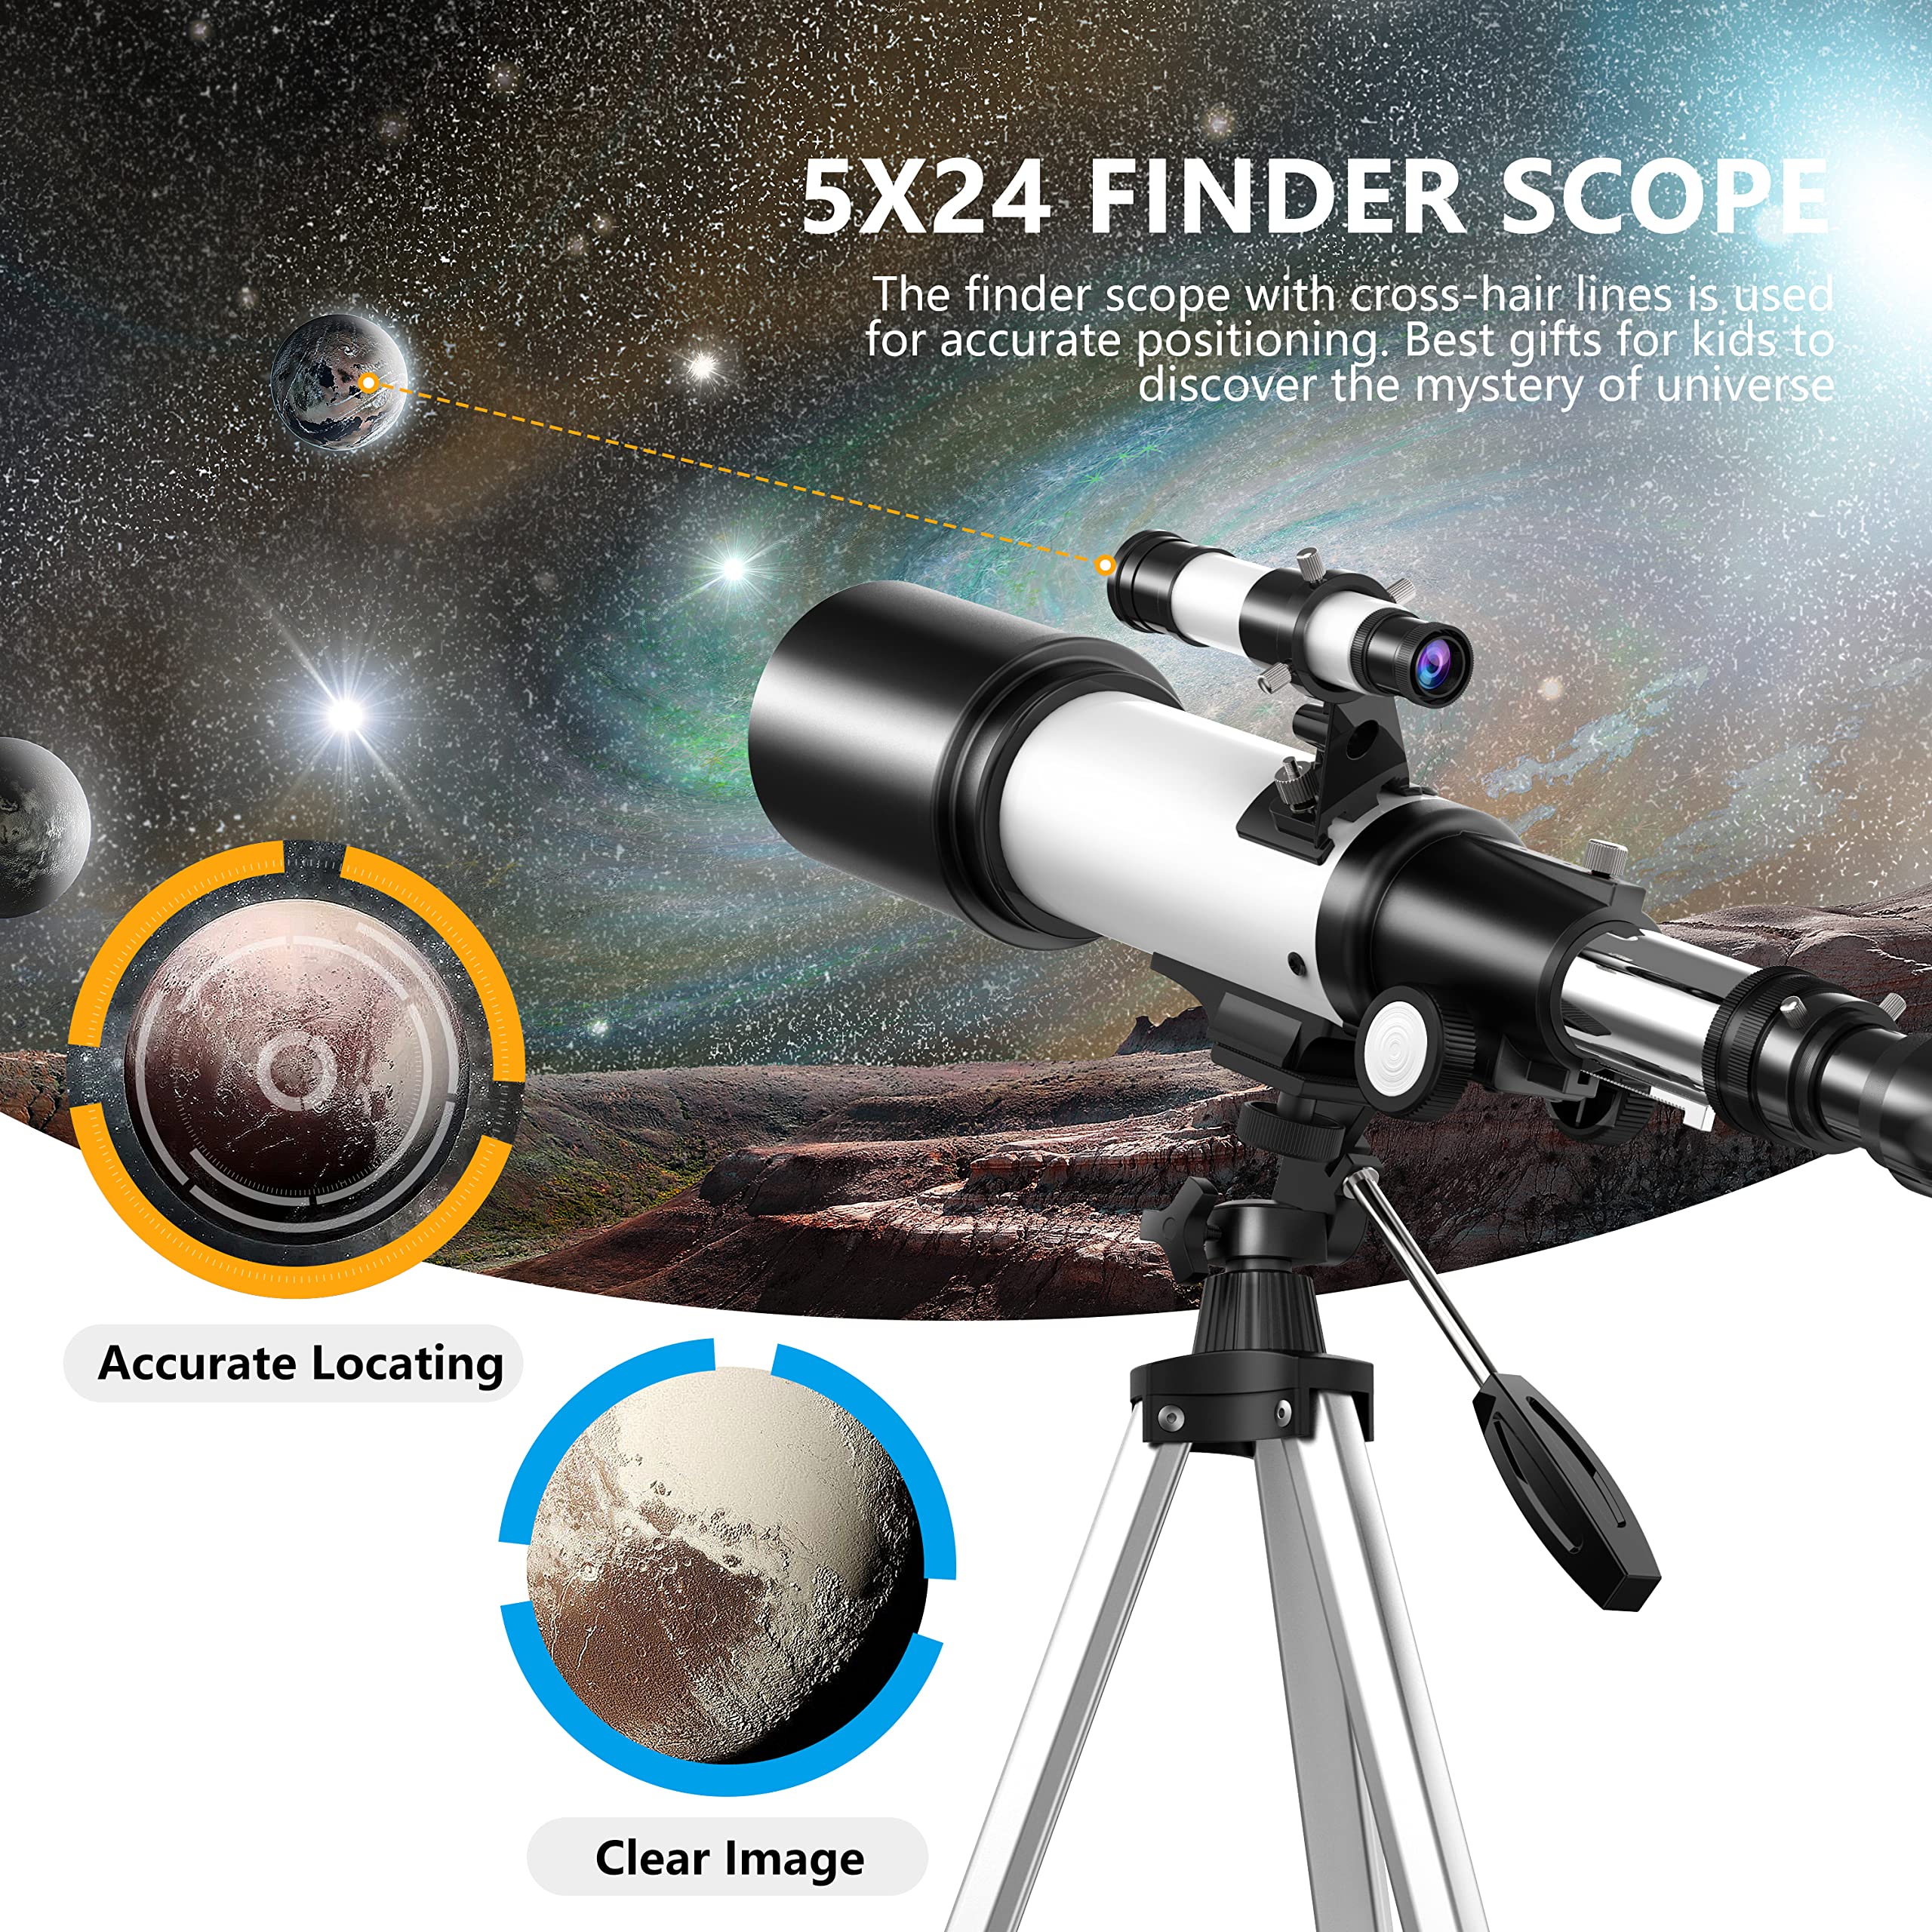 GEREFEREN Telescope for Astronomy Beginners (16X-120X), 70mm Aperture Fully Multi-Coated Refractor Telescopes for Adults & Kids with AZ Mount Tripod Phone Adapter & Carrying Bag